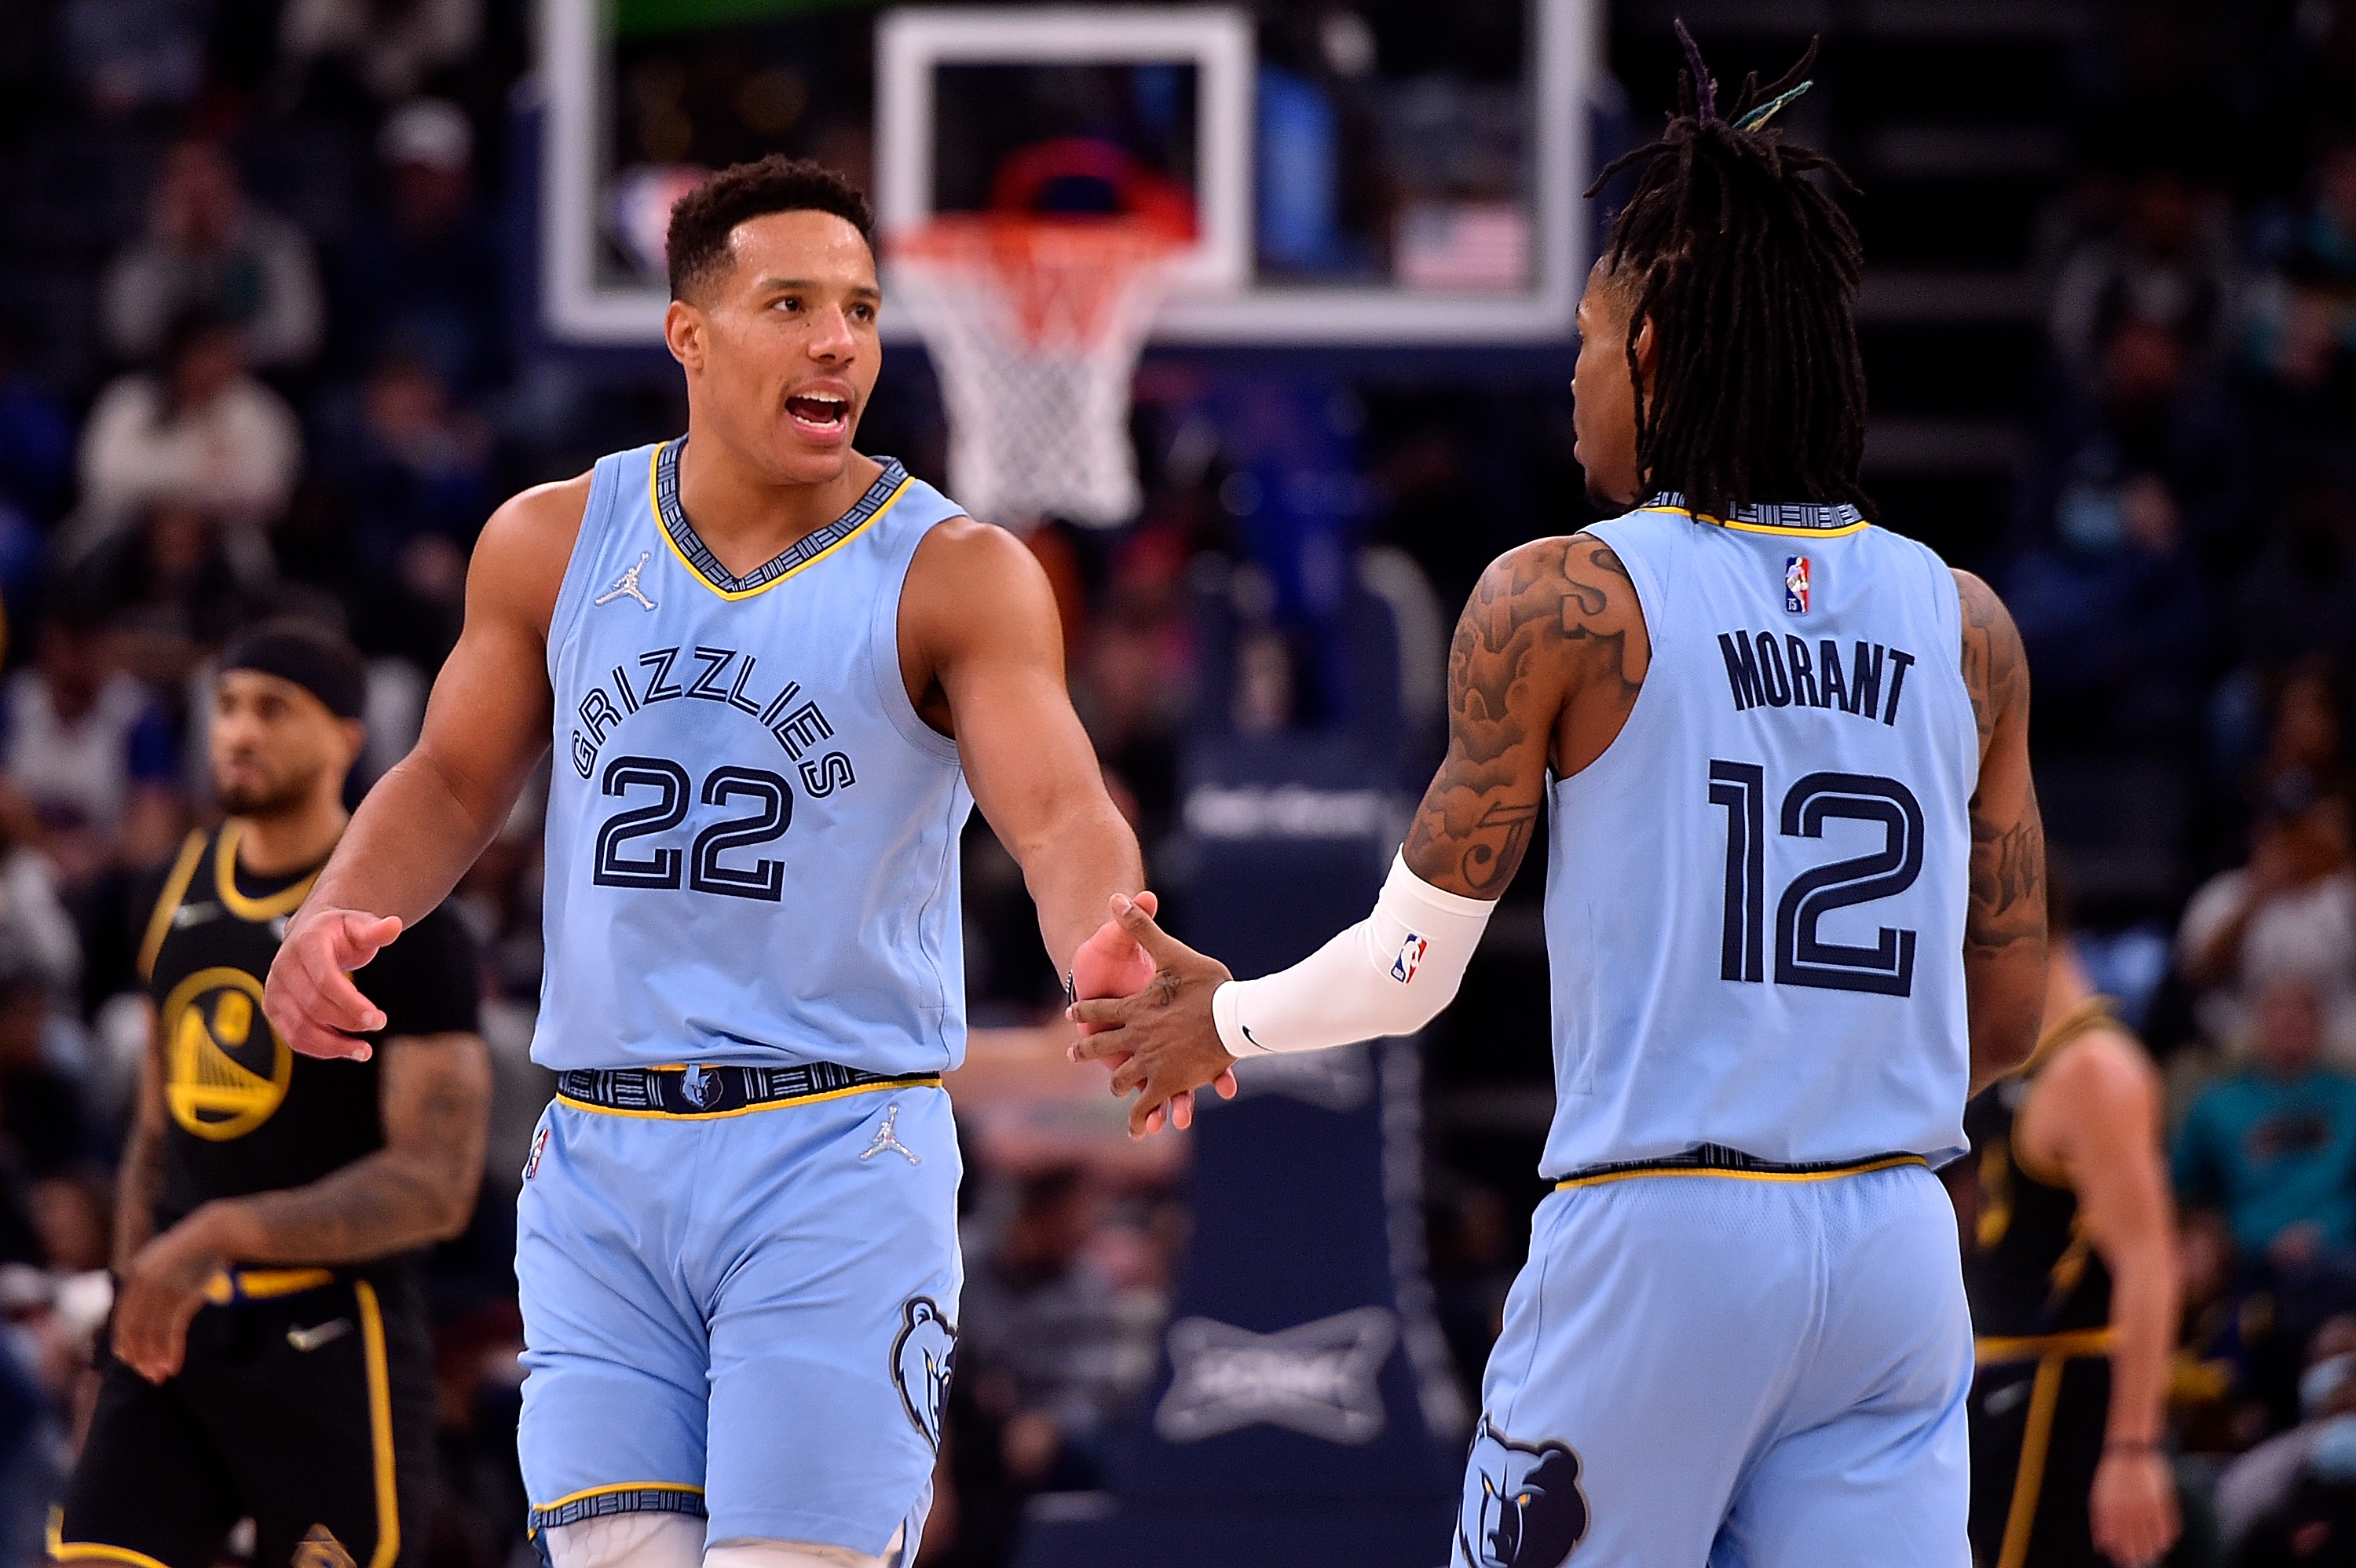 NBA: Desmond Bane Wants 3 Point Contest, Most Improved Player